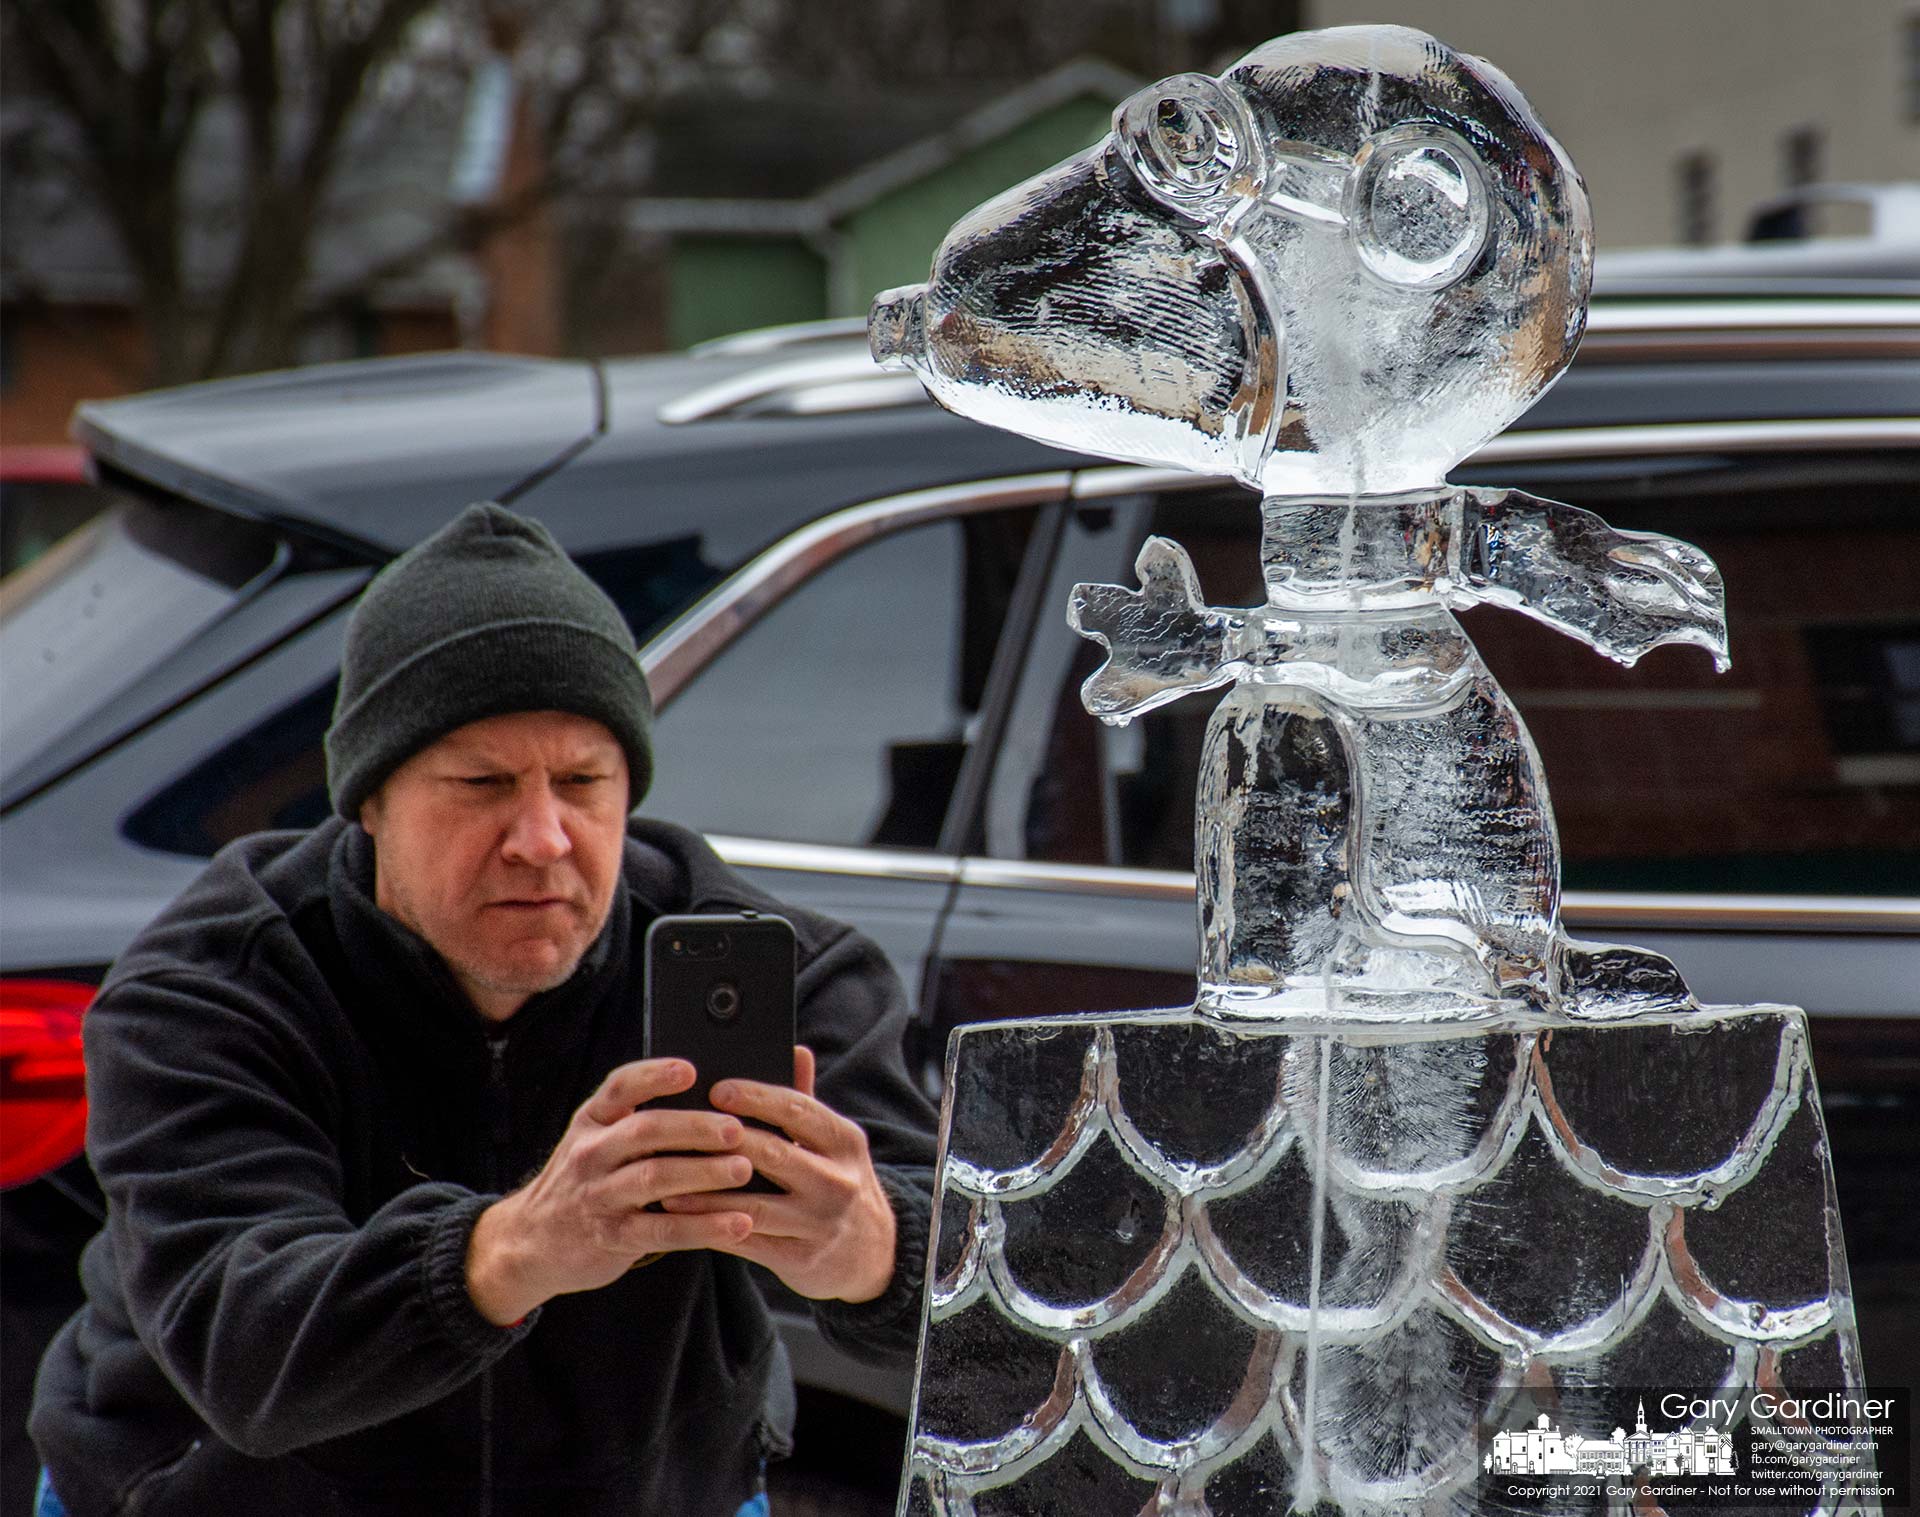 A man pauses on a Sunday walk in Uptown Westerville to photograph a Snoopy ice sculpture, one of more than a dozen sculptures on display this weekend. My Final Photo for Dec. 19, 2021.